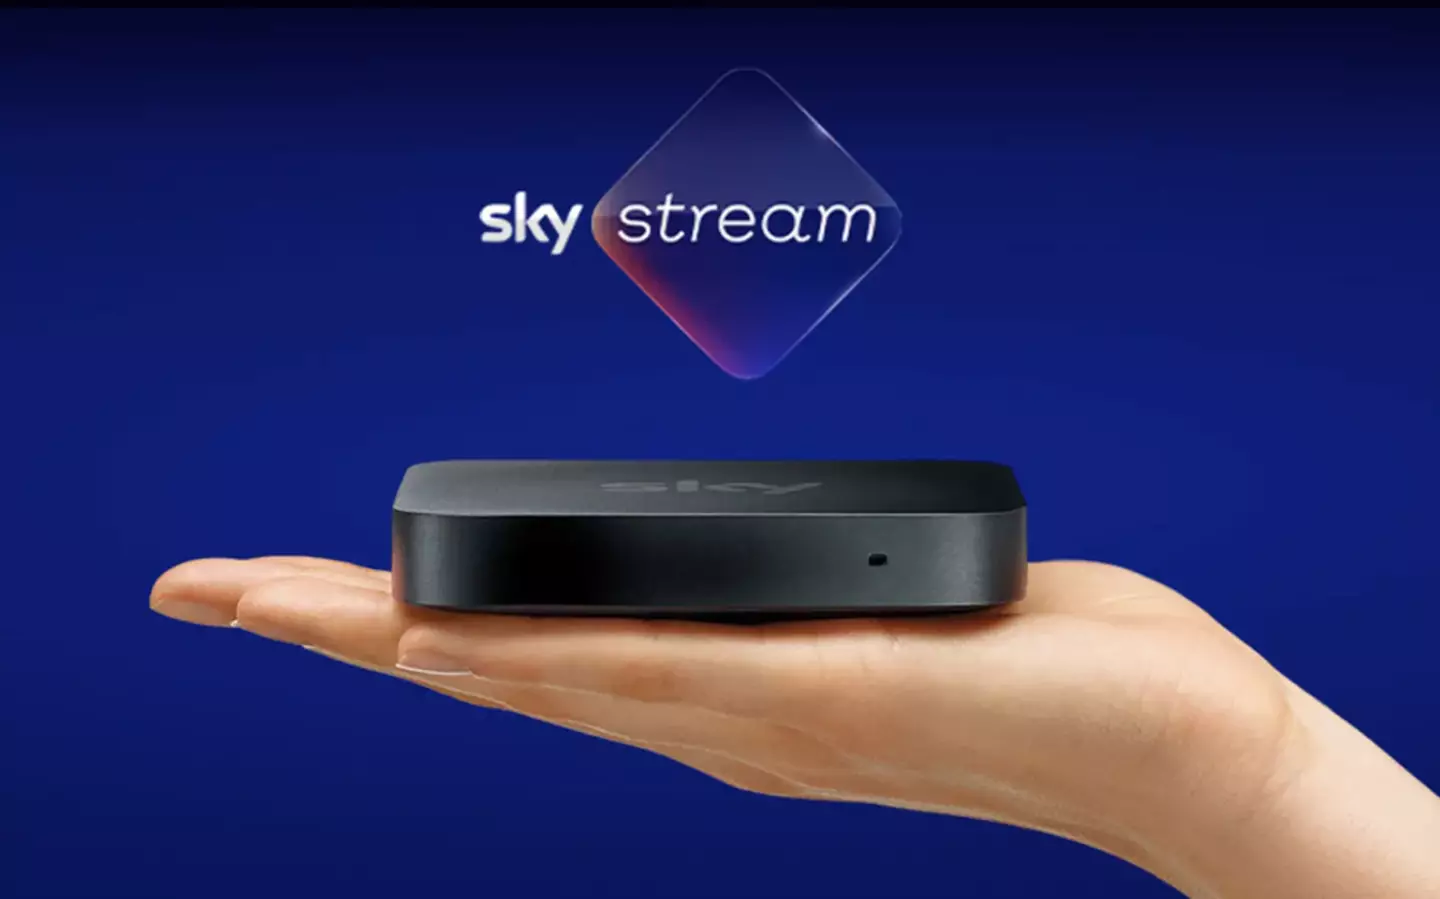 Sky has just introduced Stream, which rivals your Amazon Firestick.